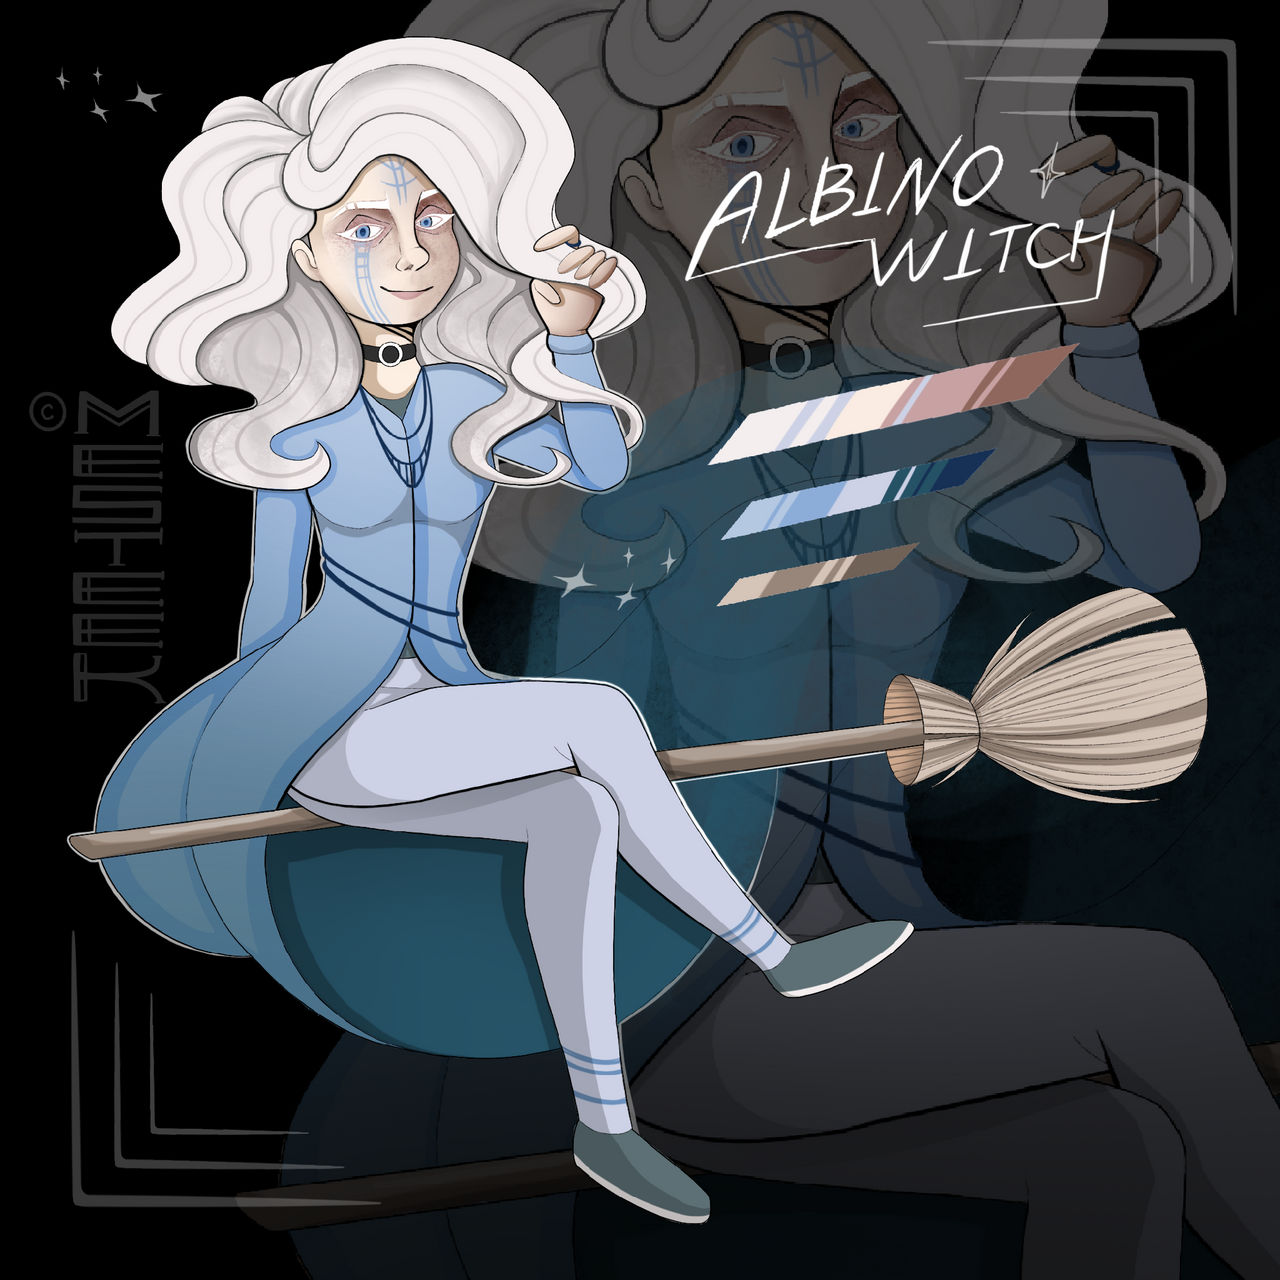 The Albino And The Witch The Albino Witch by Mesteek on DeviantArt